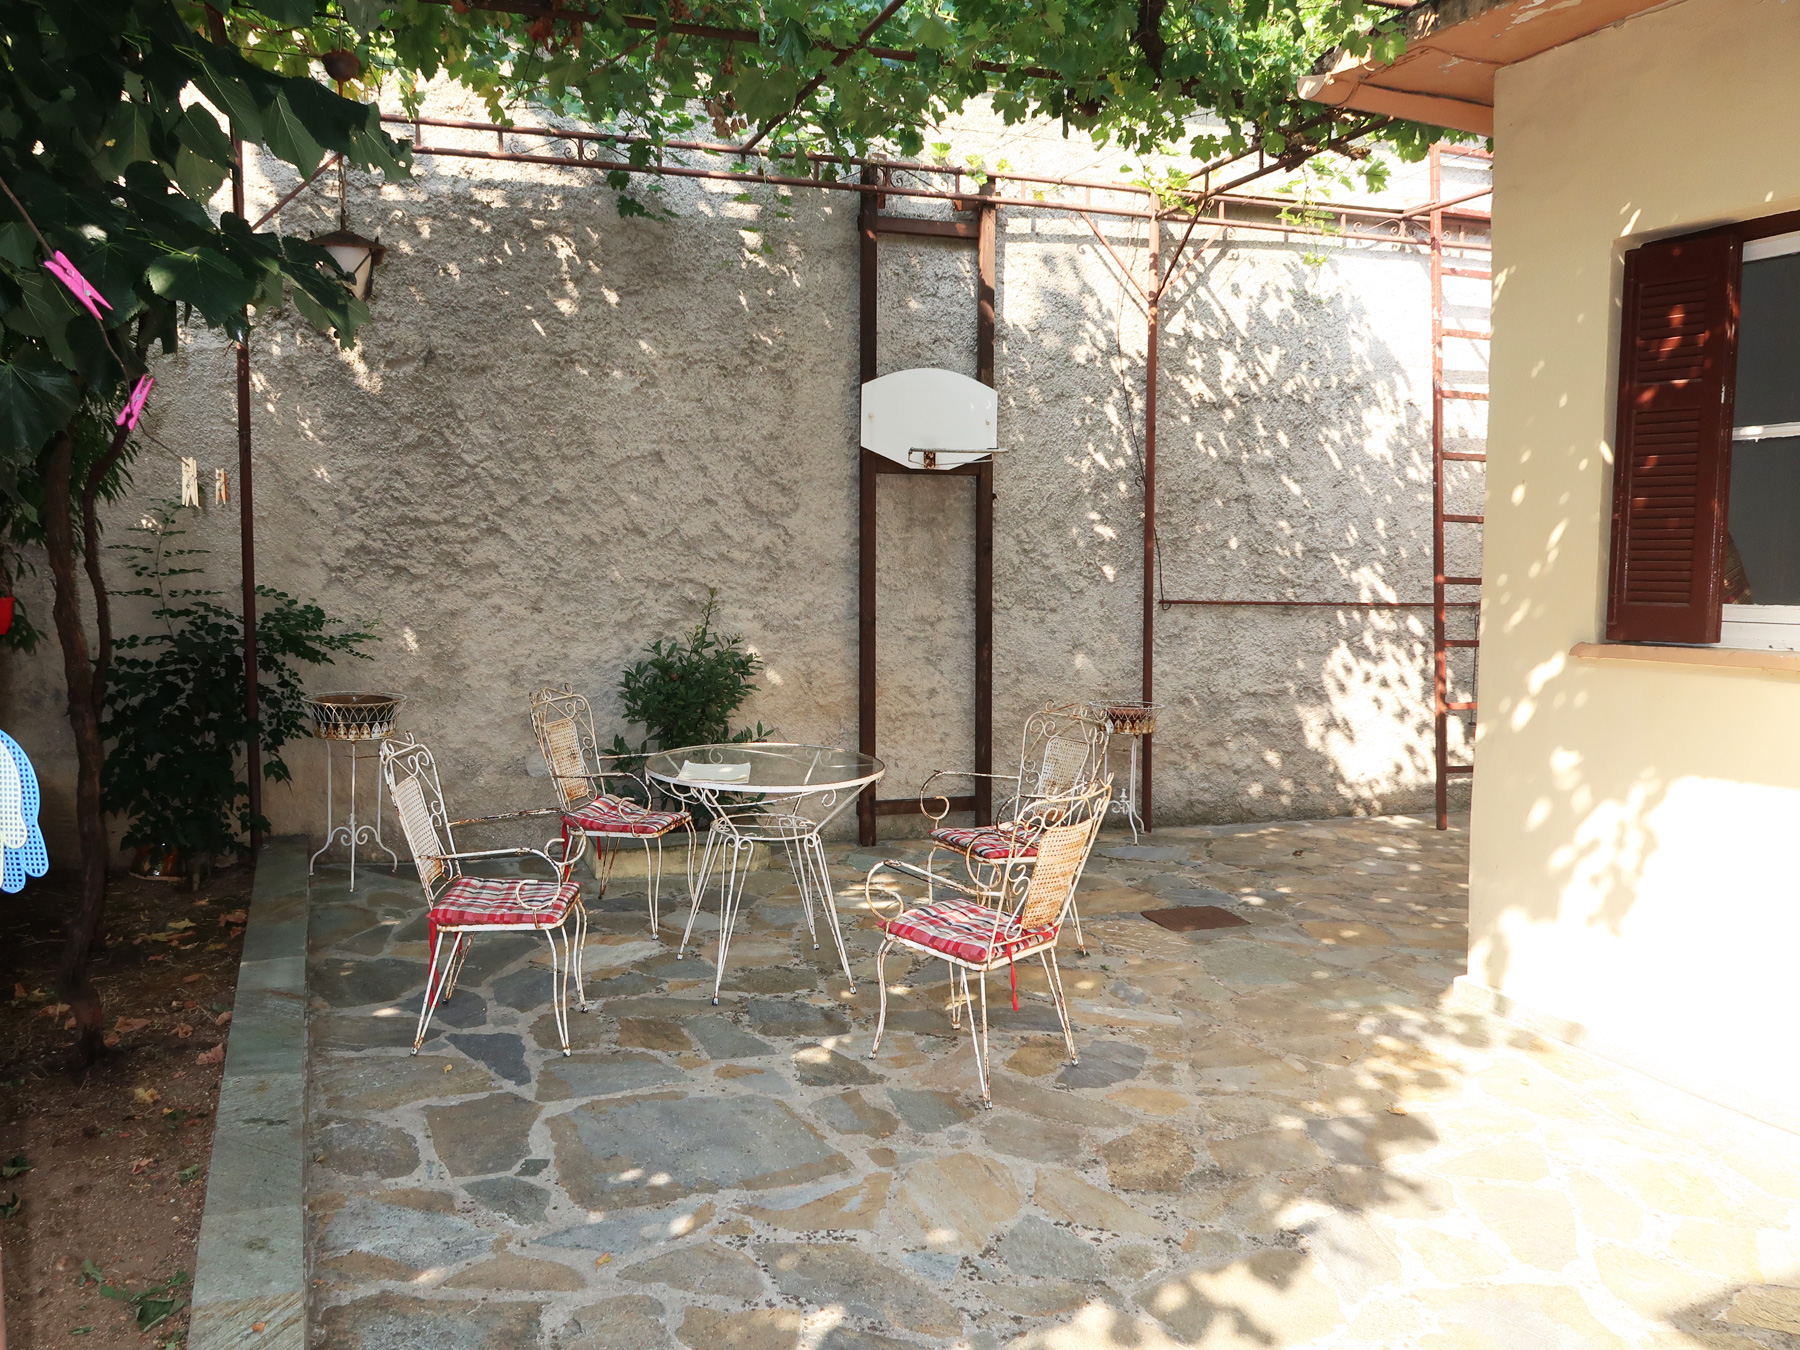 Plot for sale 336 sq.m. with S.D. 1.4 with an old detached house in the Archimandrio of Ioannina